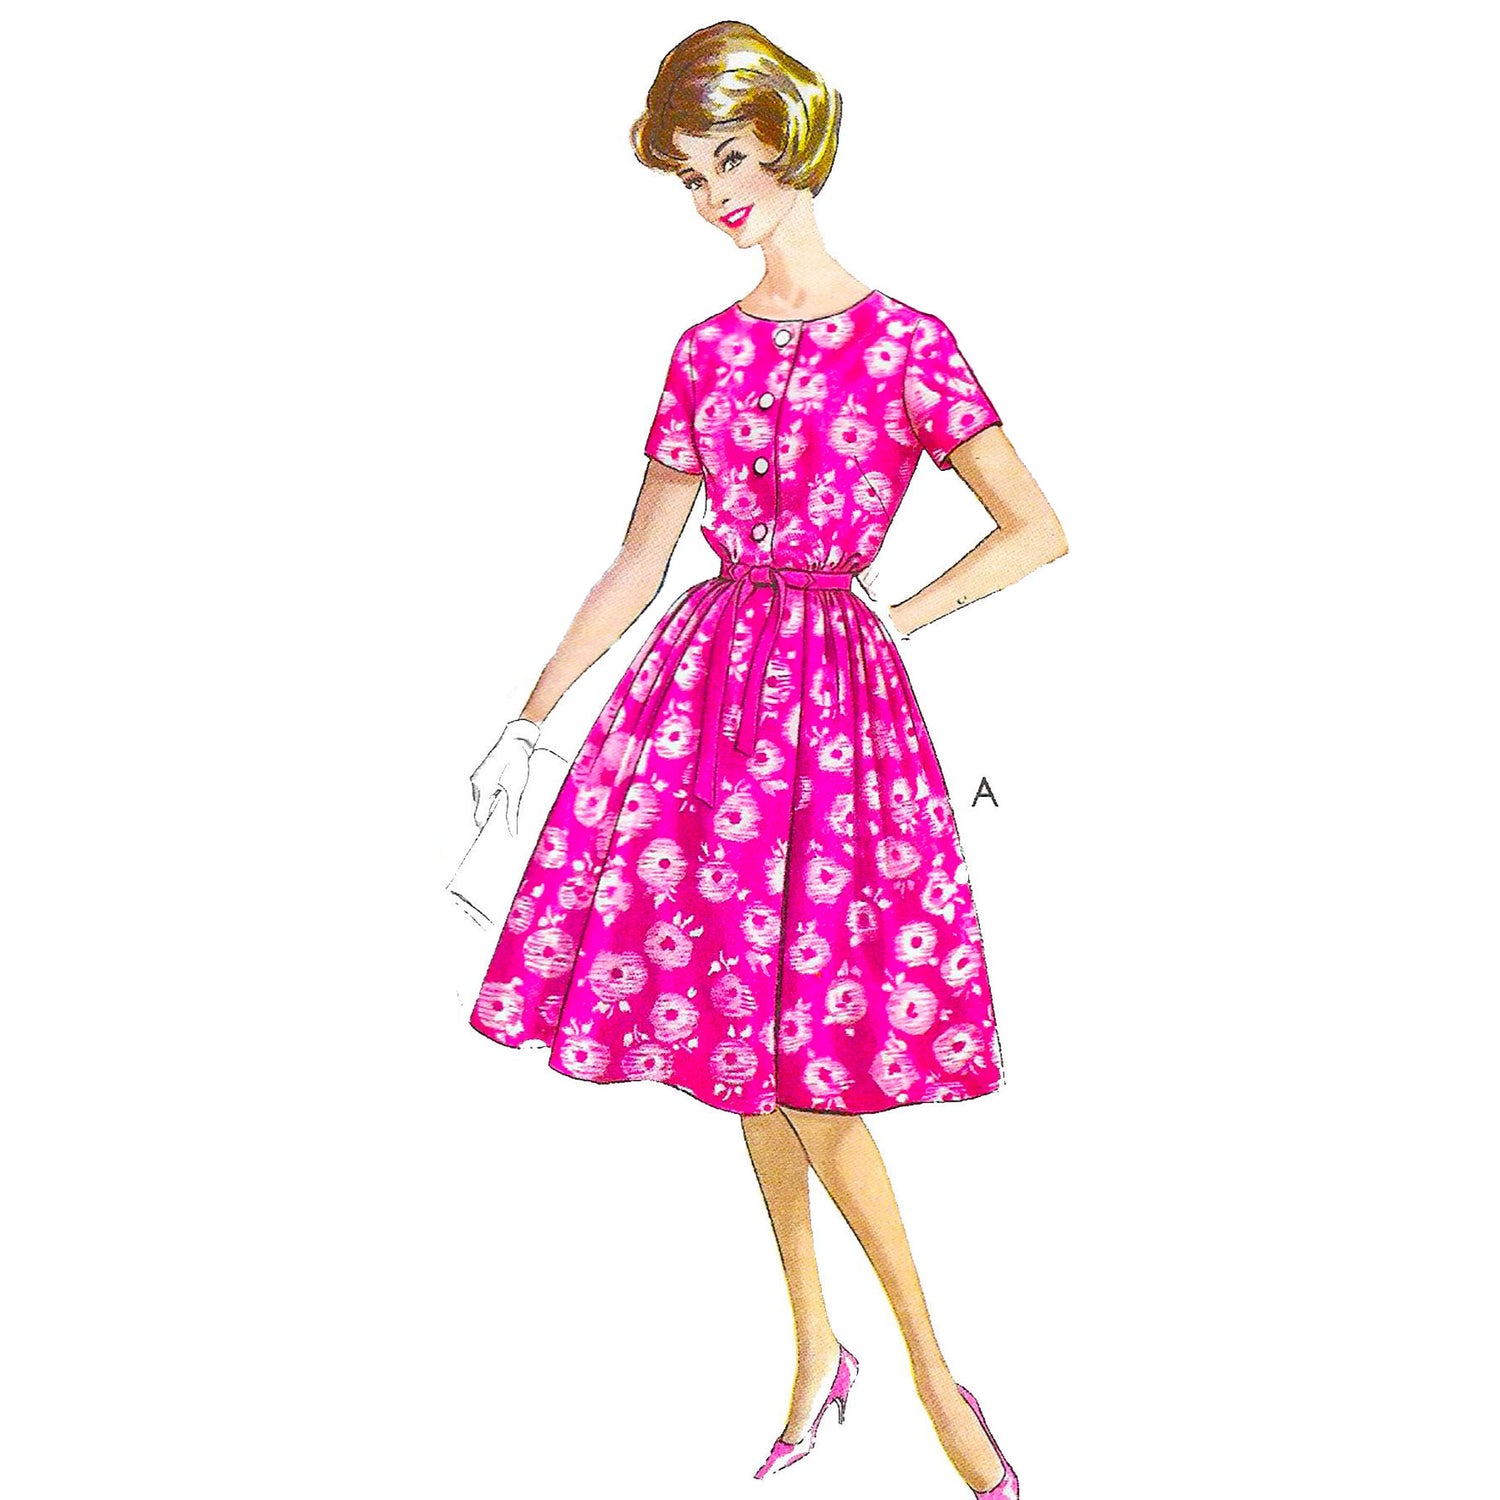 Women wearing a summer or party dress made up from ST386 sewing pattern